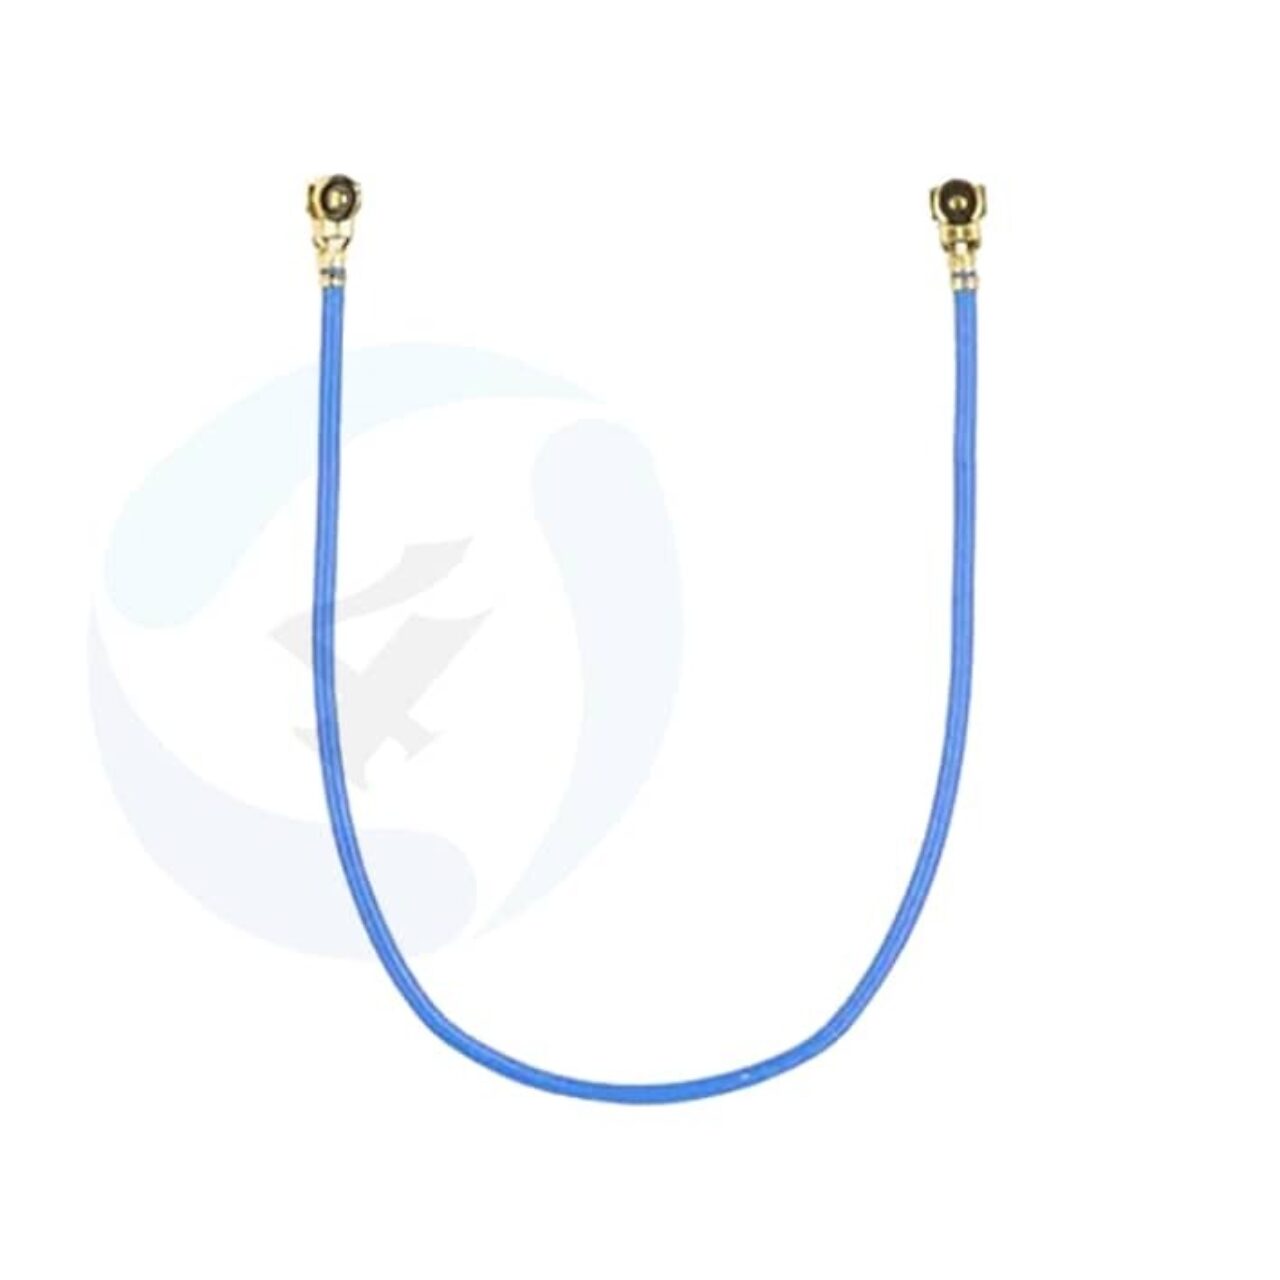 Antenna Cable Blue Samsung Galaxy Xcover Pro SM G715